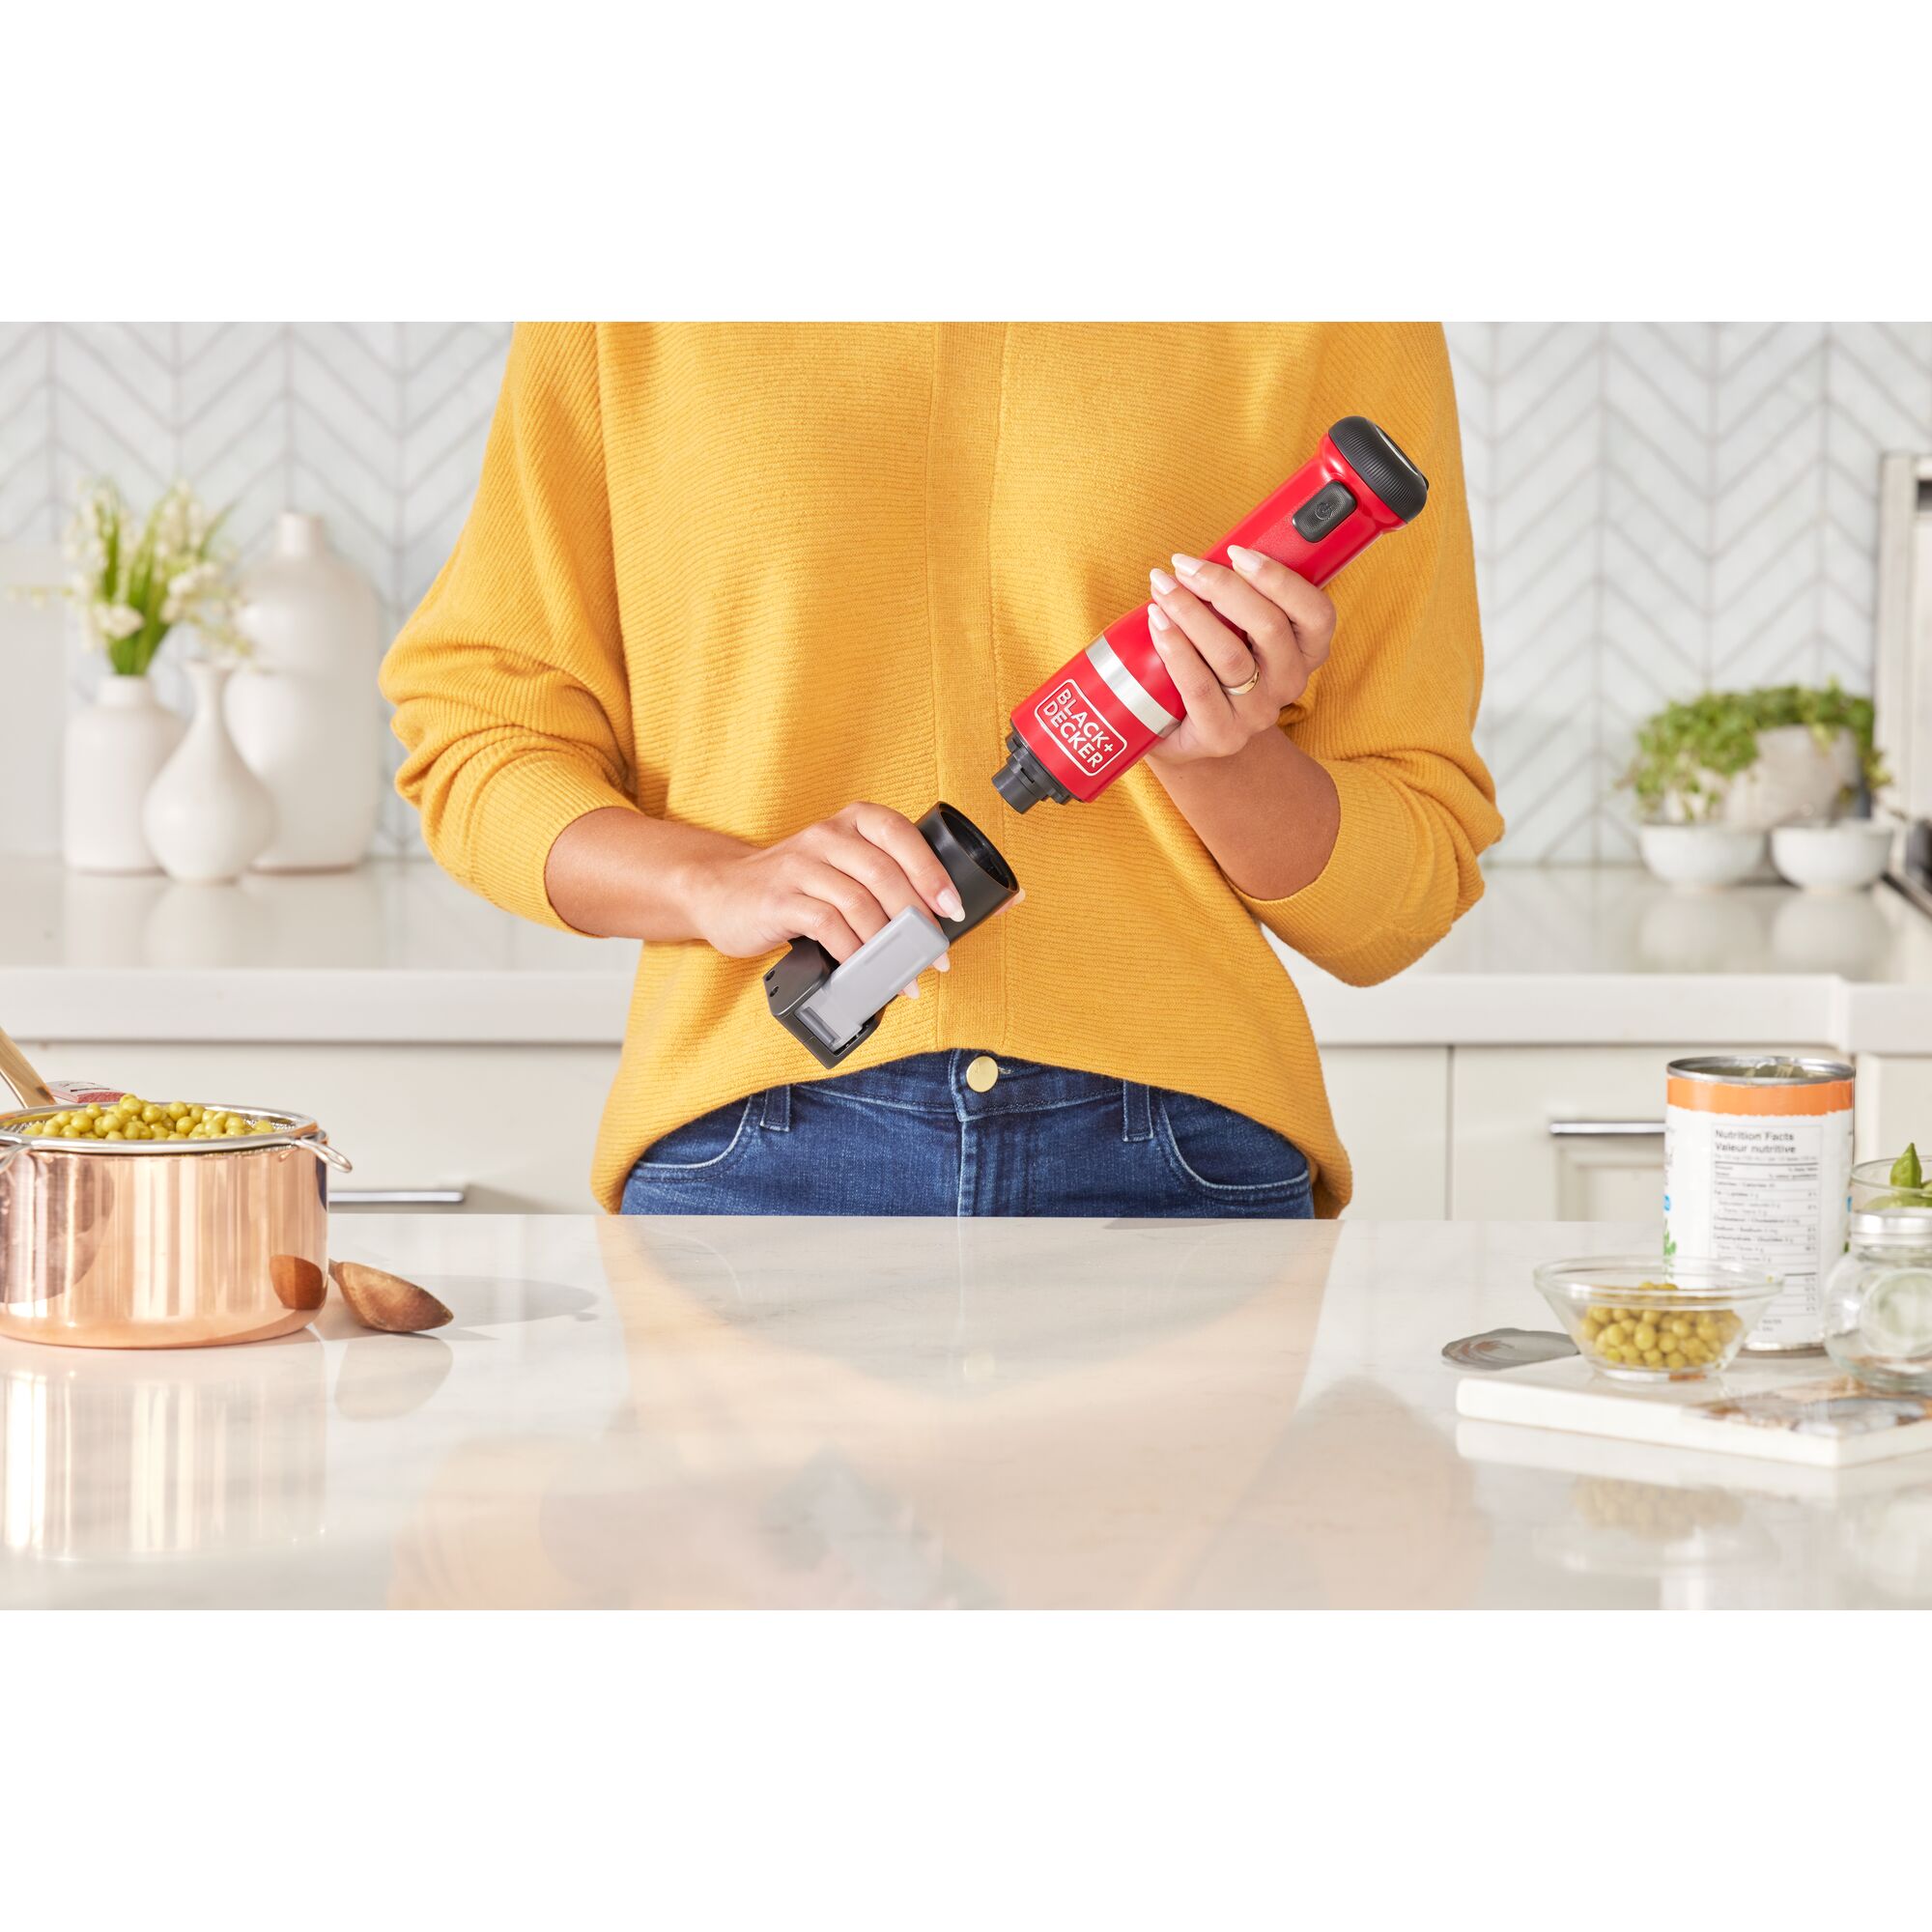 Talent showing how to attach the BLACK+DECKER kitchen wand can opener attachment to the red power unit